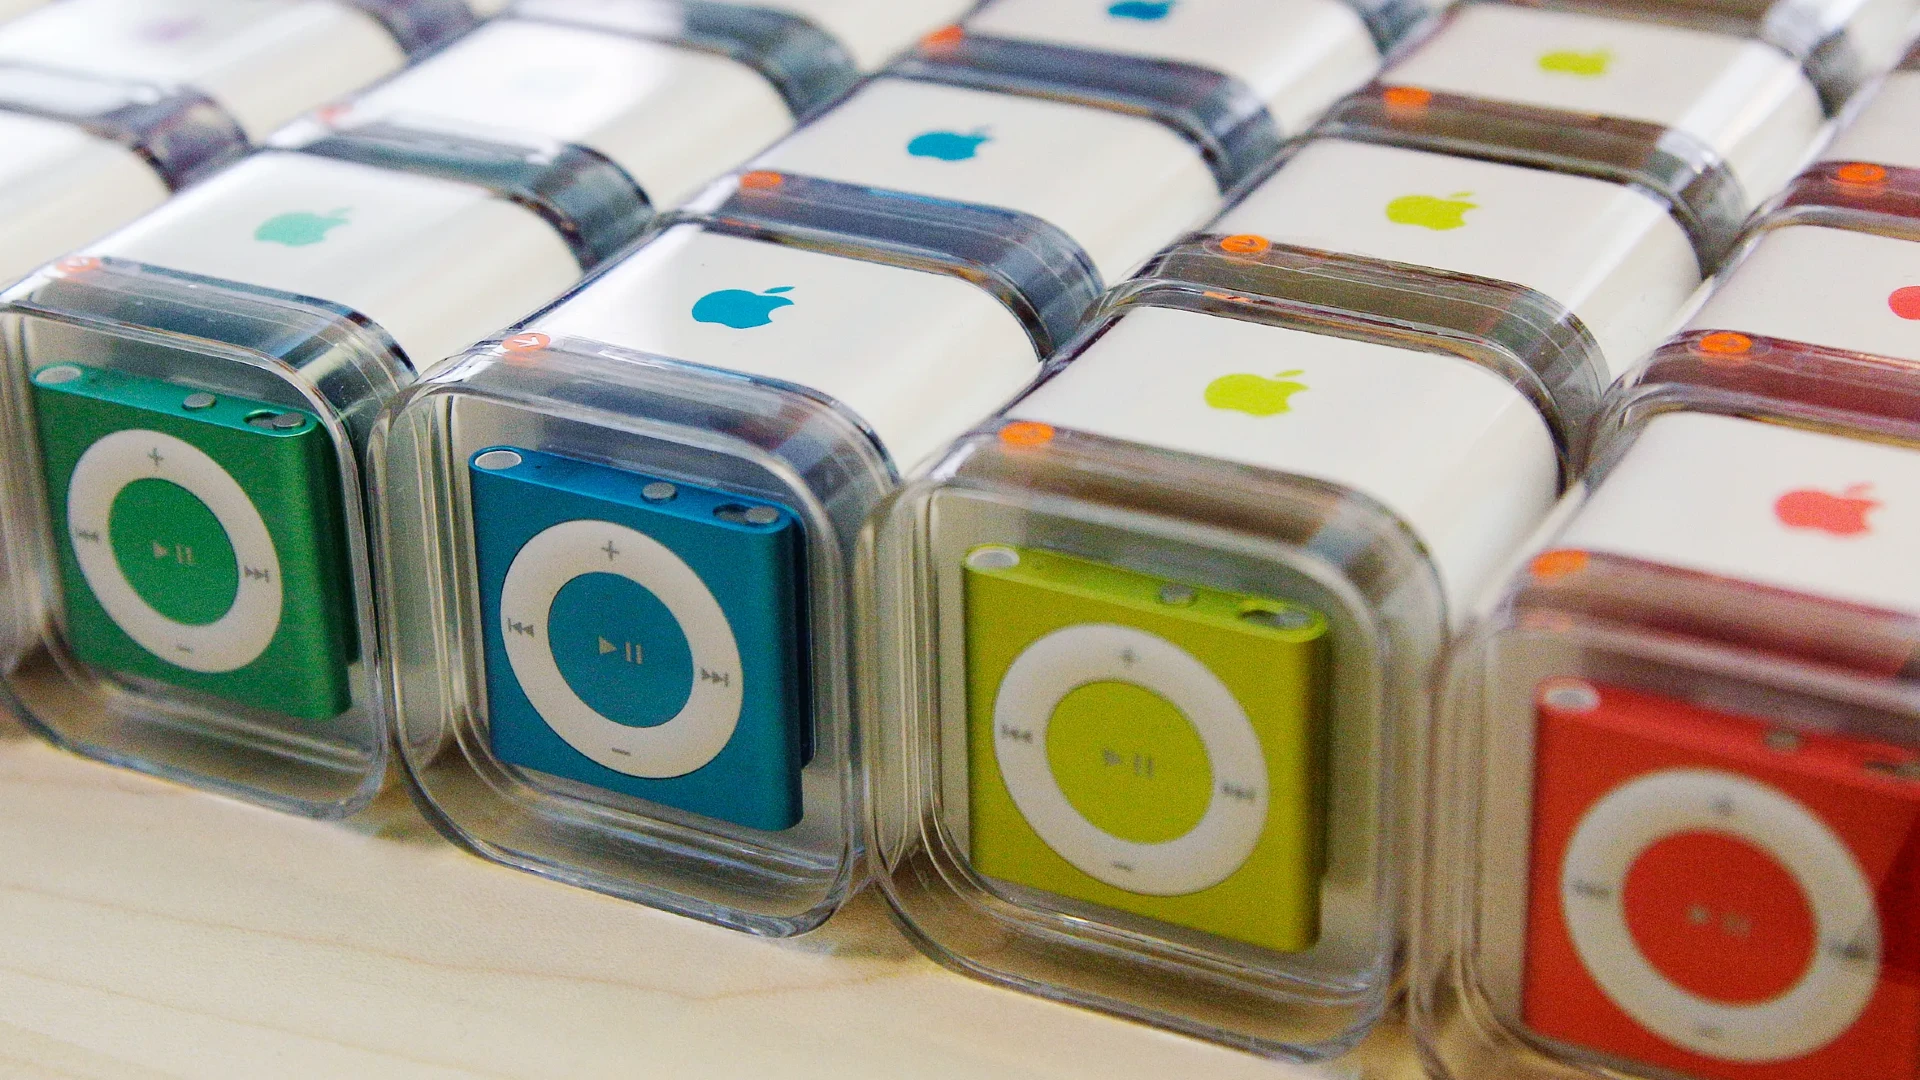 Apple Cuts The Plug On Its Last IPod Lineup After 20 Years